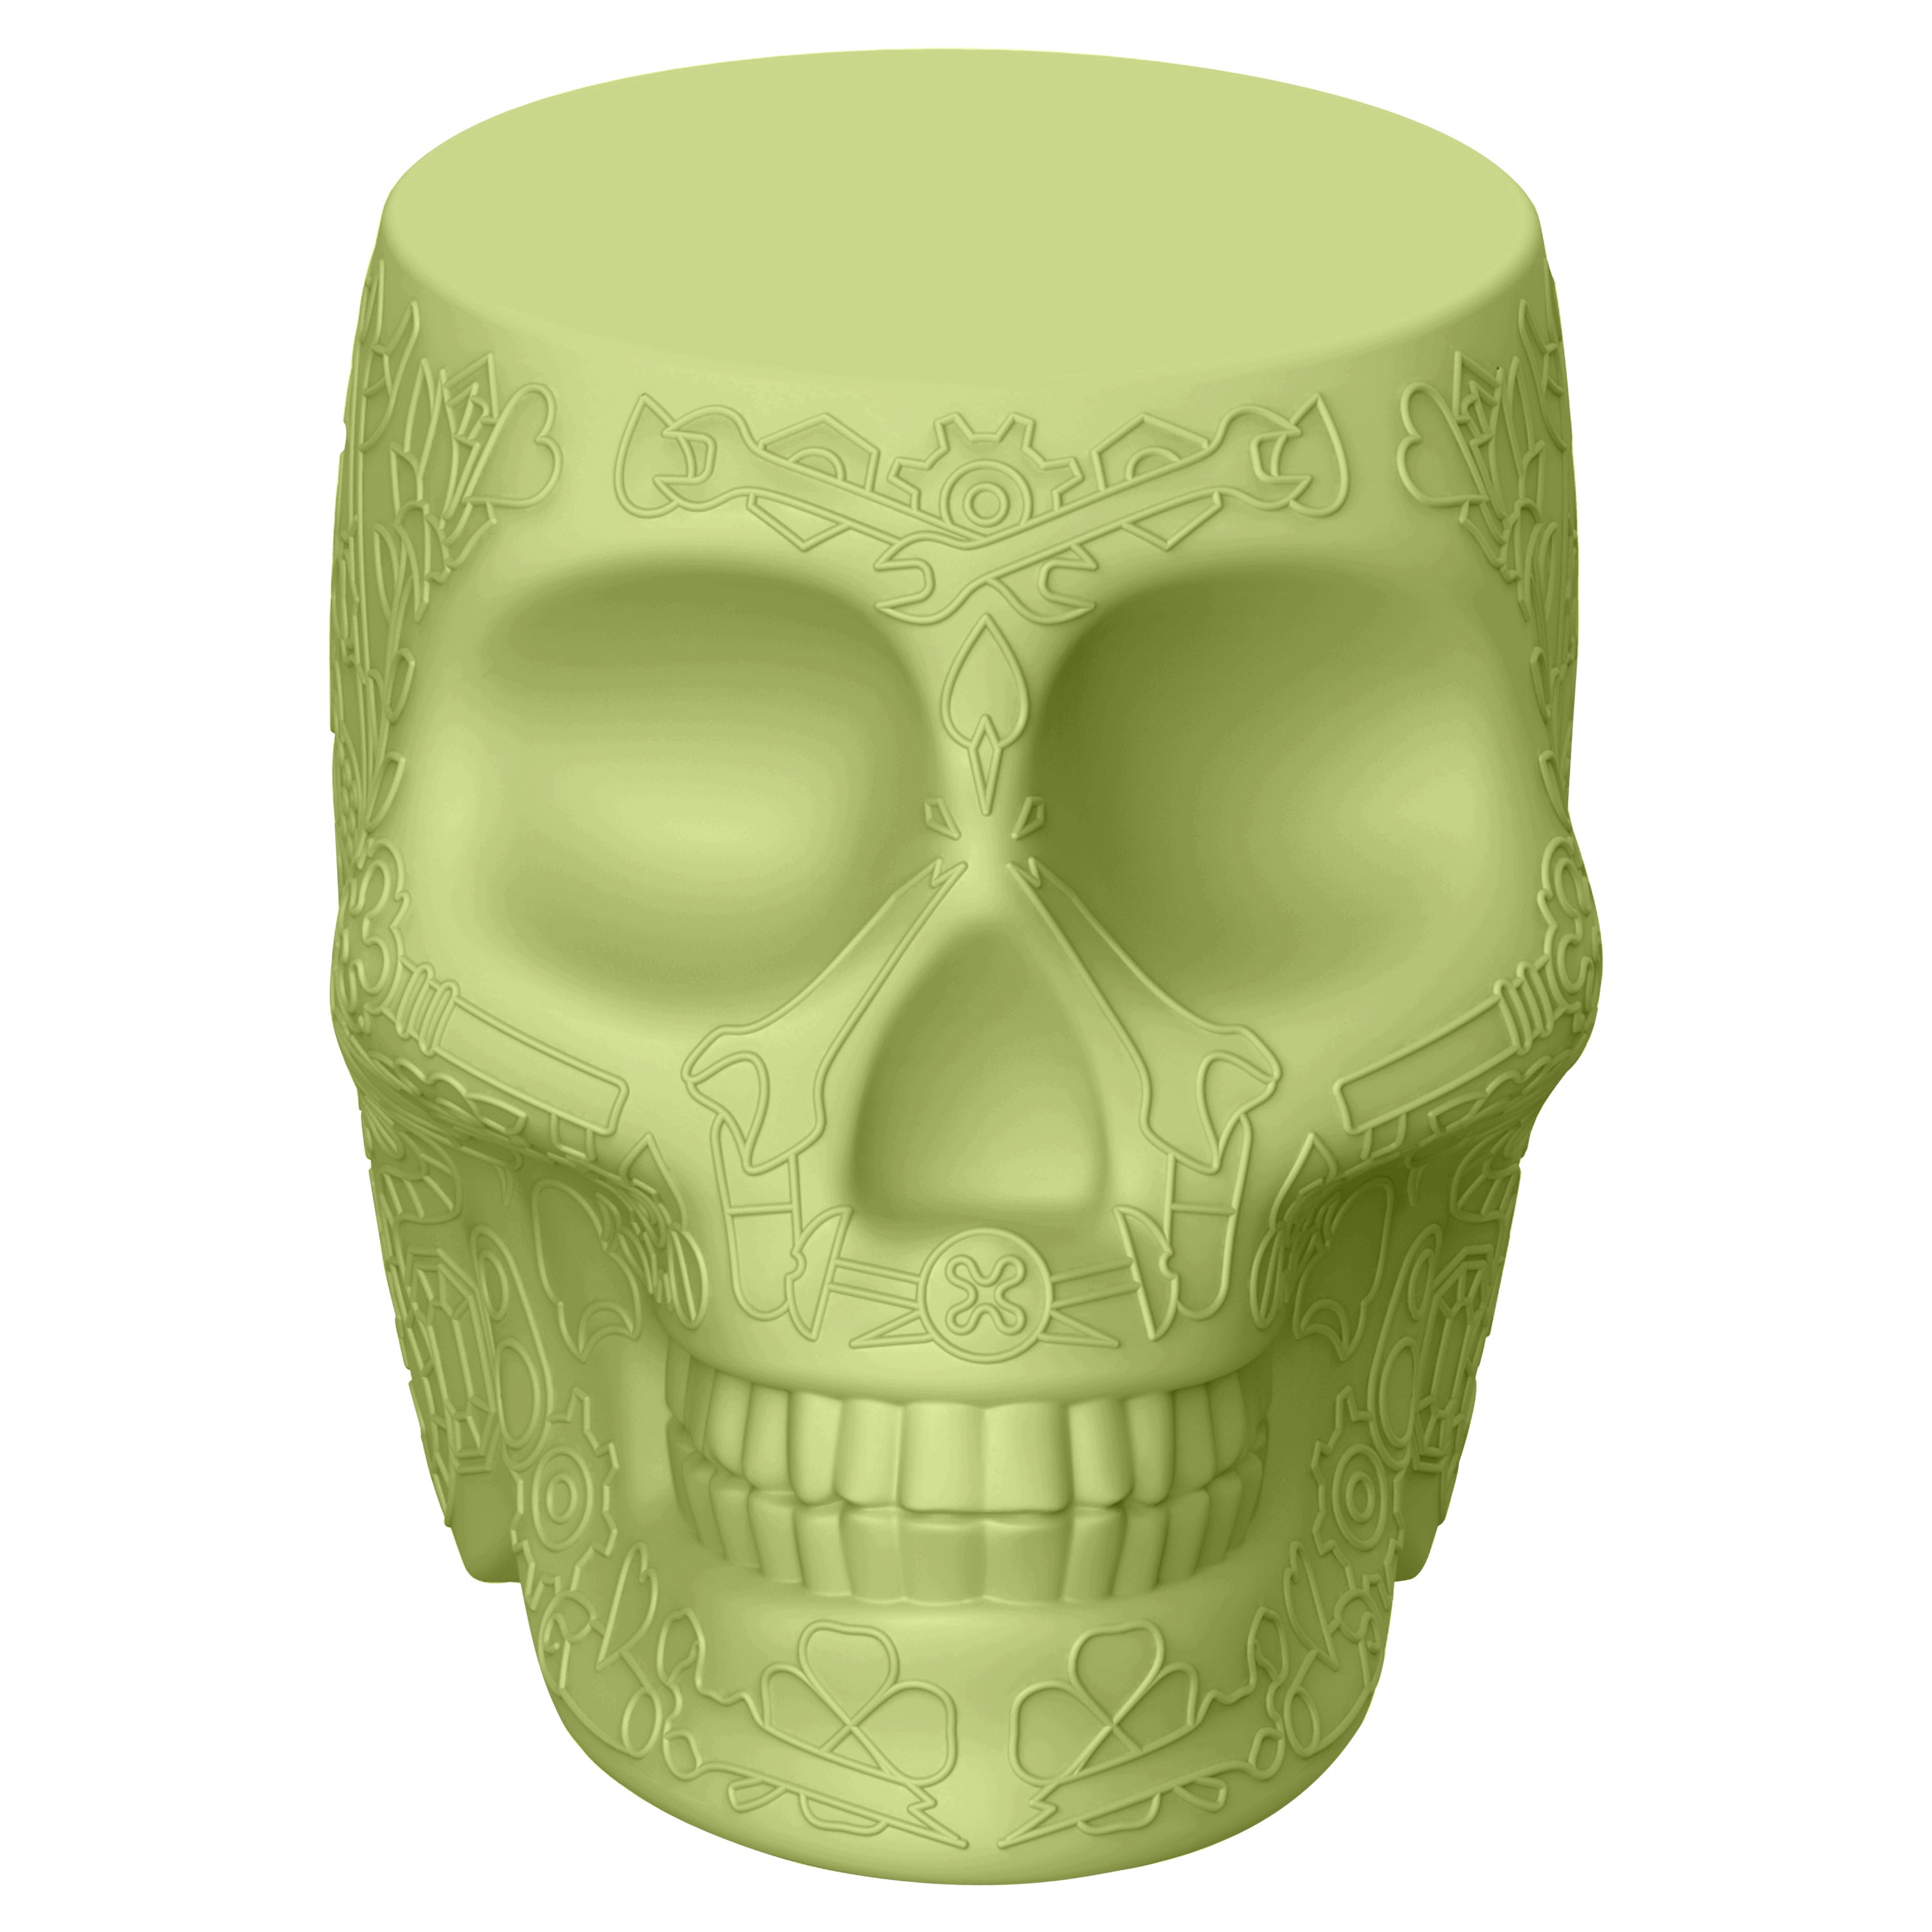 In Stock in Los Angeles, Green Mexico Skull Mini Portable Bank Charger